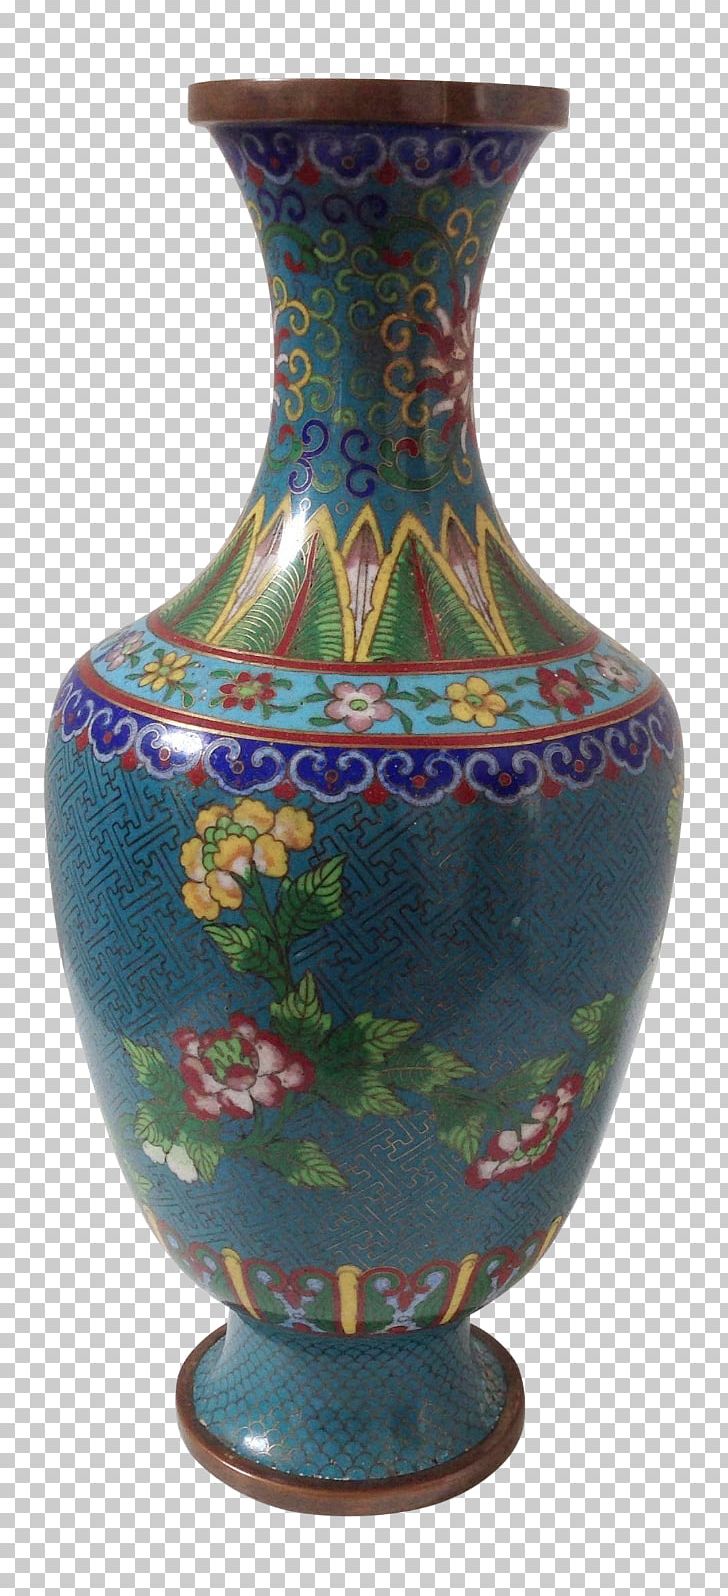 Vase Ceramic Pottery Urn PNG, Clipart, Artifact, Ceramic, Porcelain, Pottery, Urn Free PNG Download